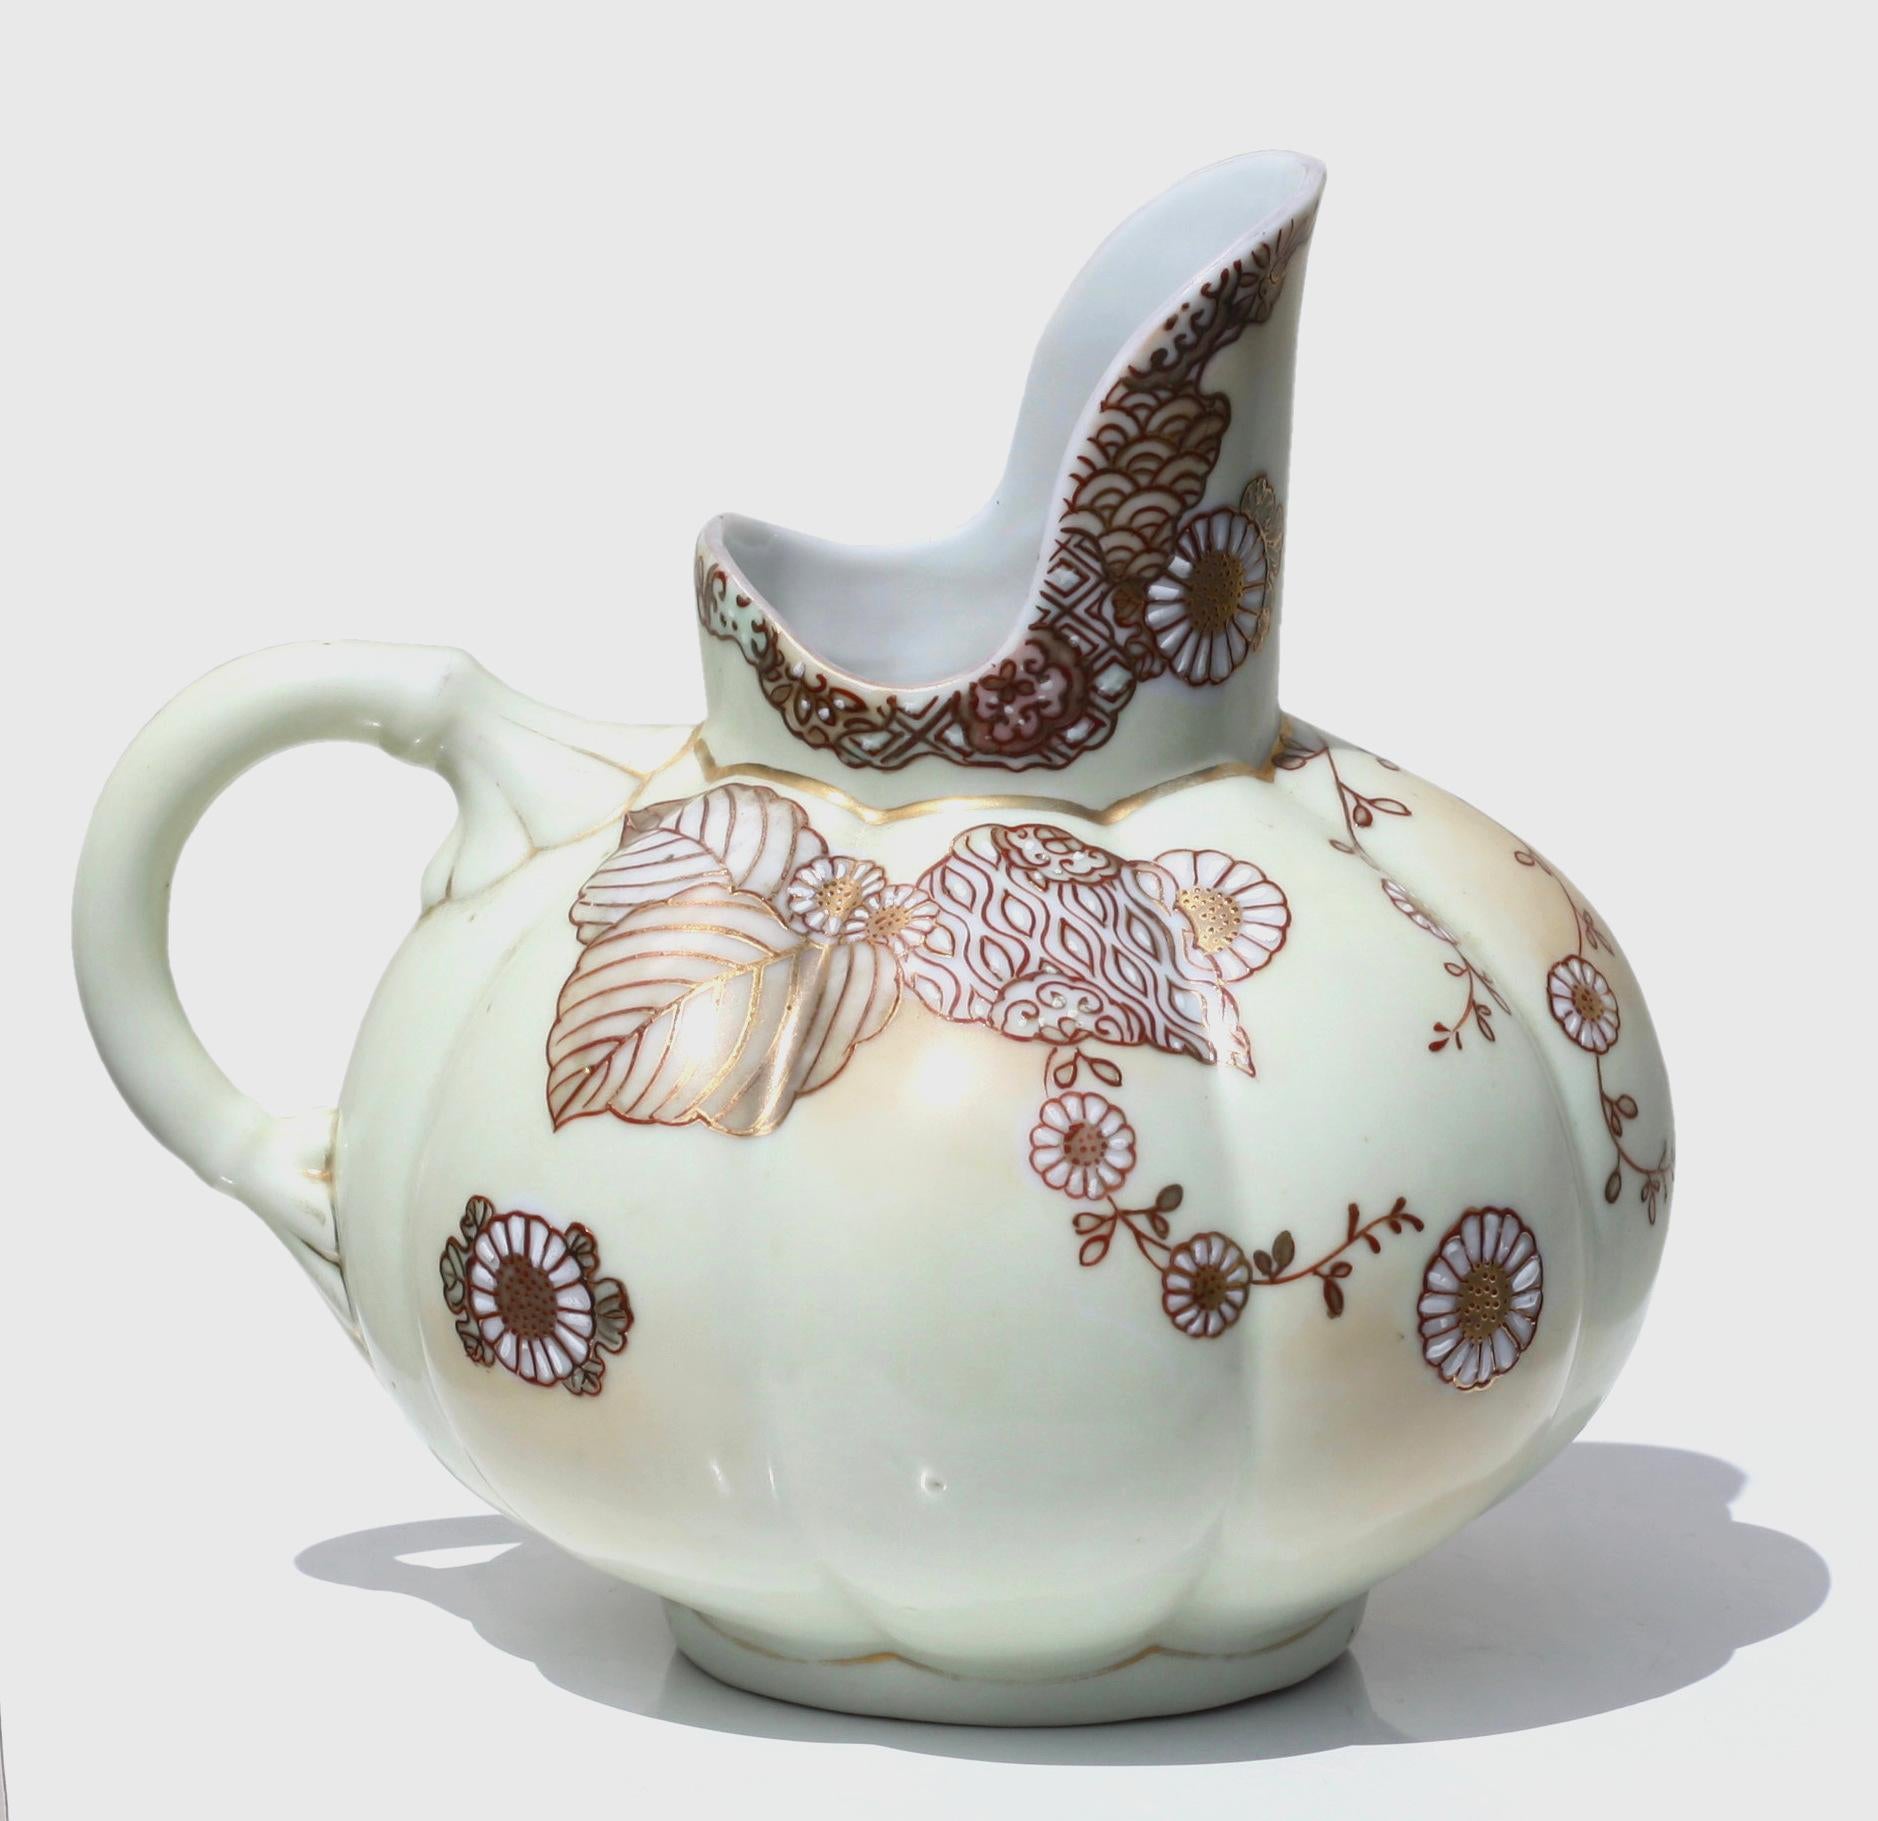 A Japanese Porcelain gilt and enamel pitcher
Signed
Measures: 8 by 8 in. (20.32 x 20.32 cm.).

 